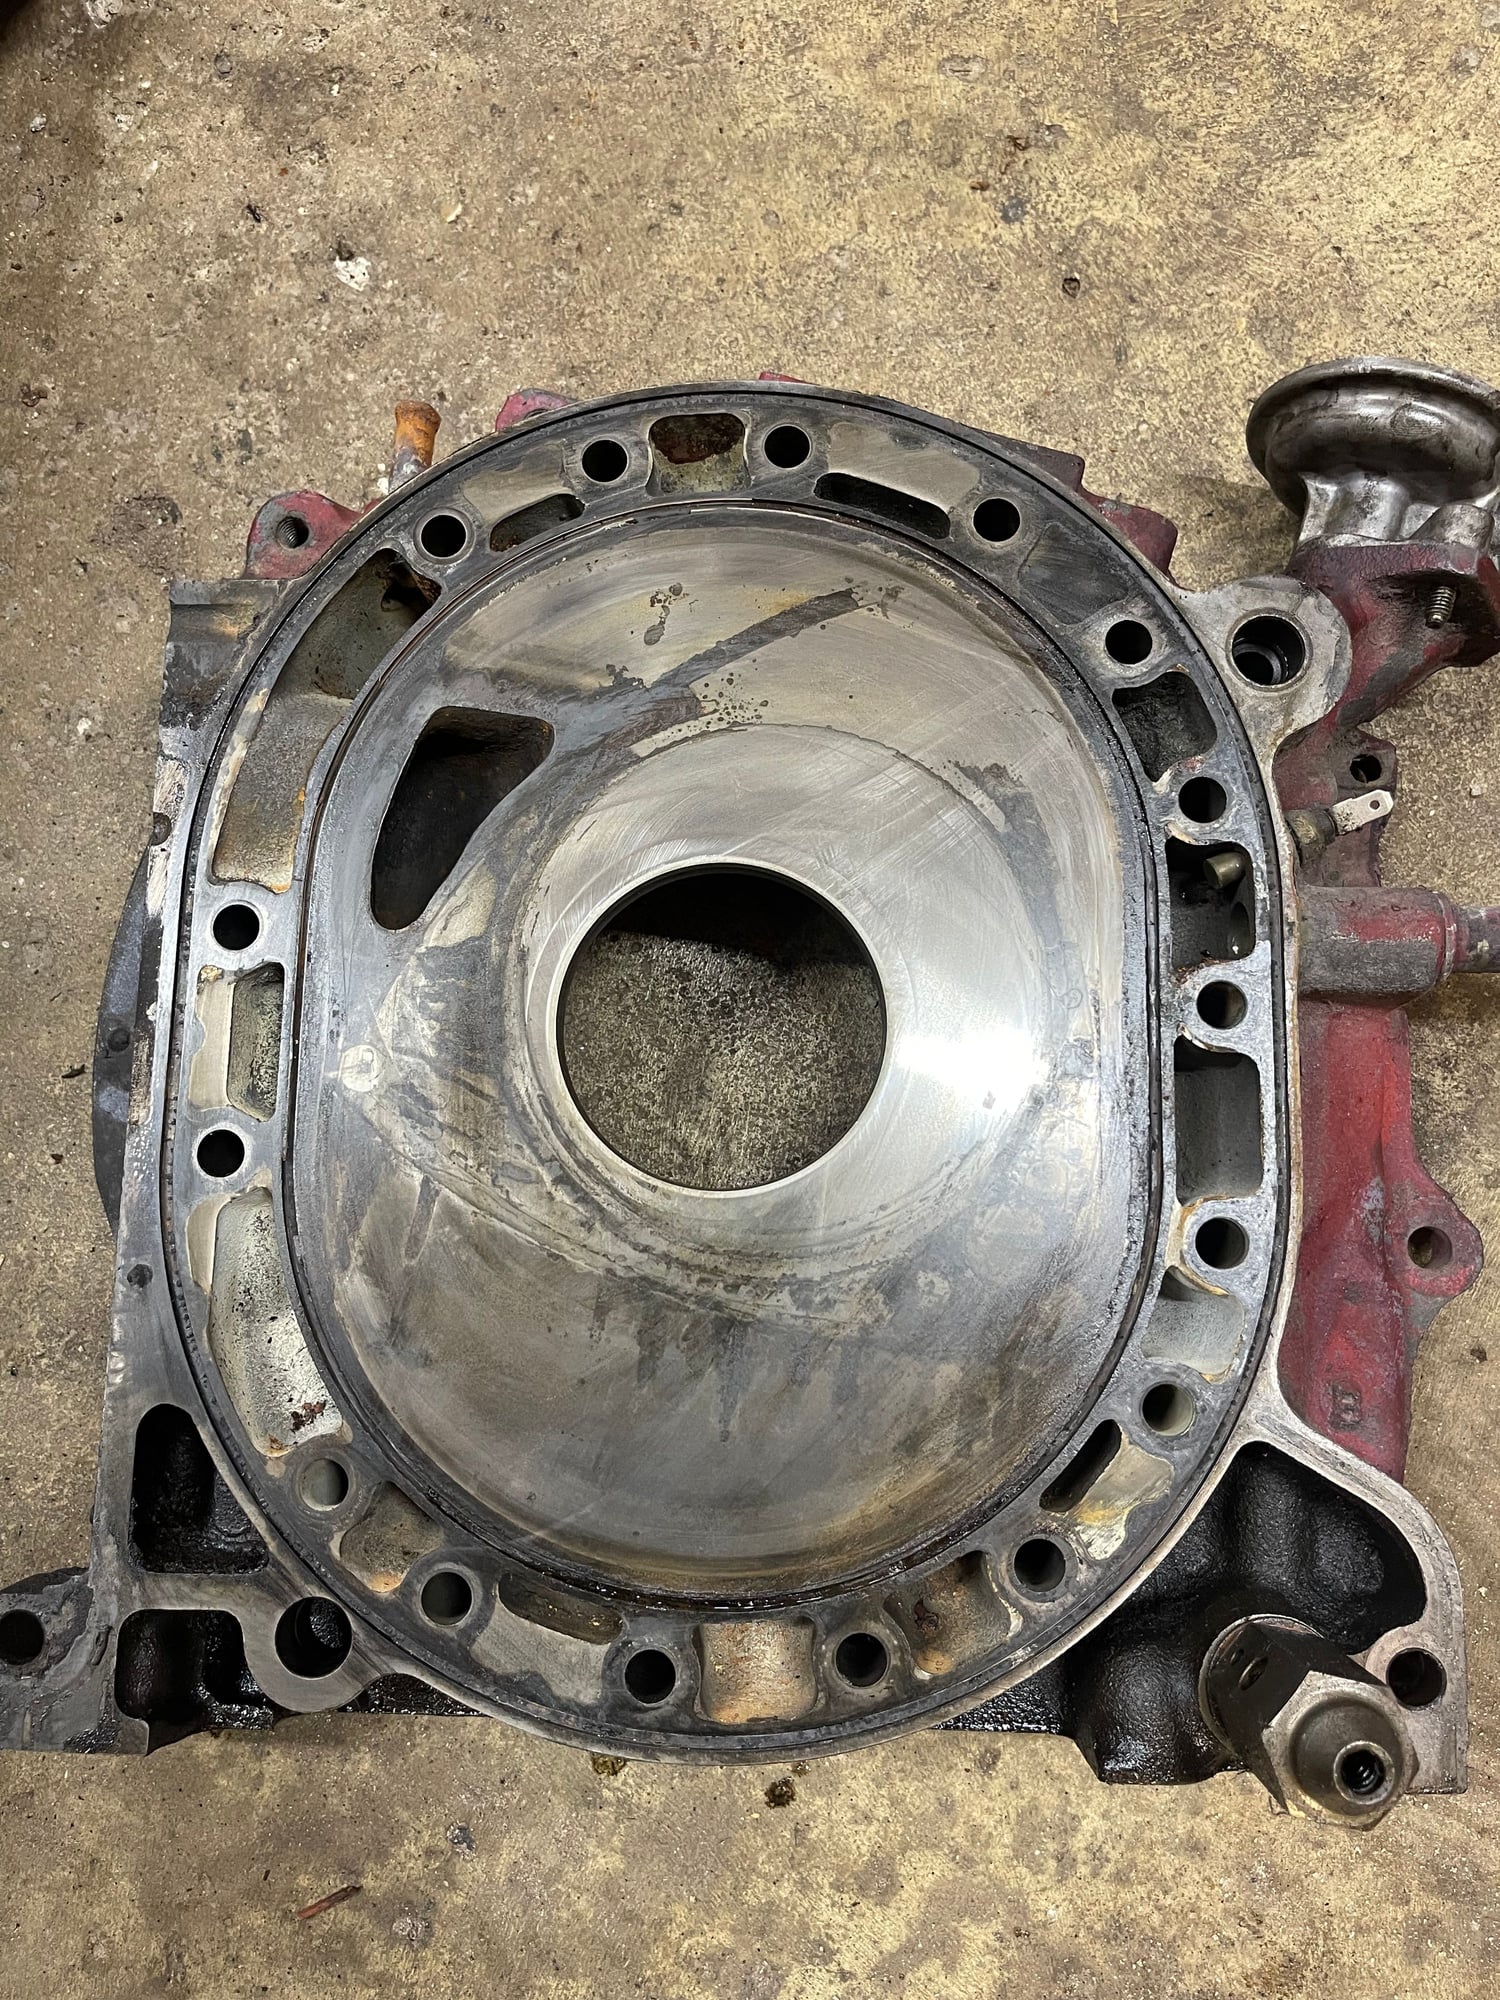 Engine - Complete - 13brew keg part out. - Used - 1993 to 1995 Mazda RX-7 - Saint Anne, IL 60964, United States